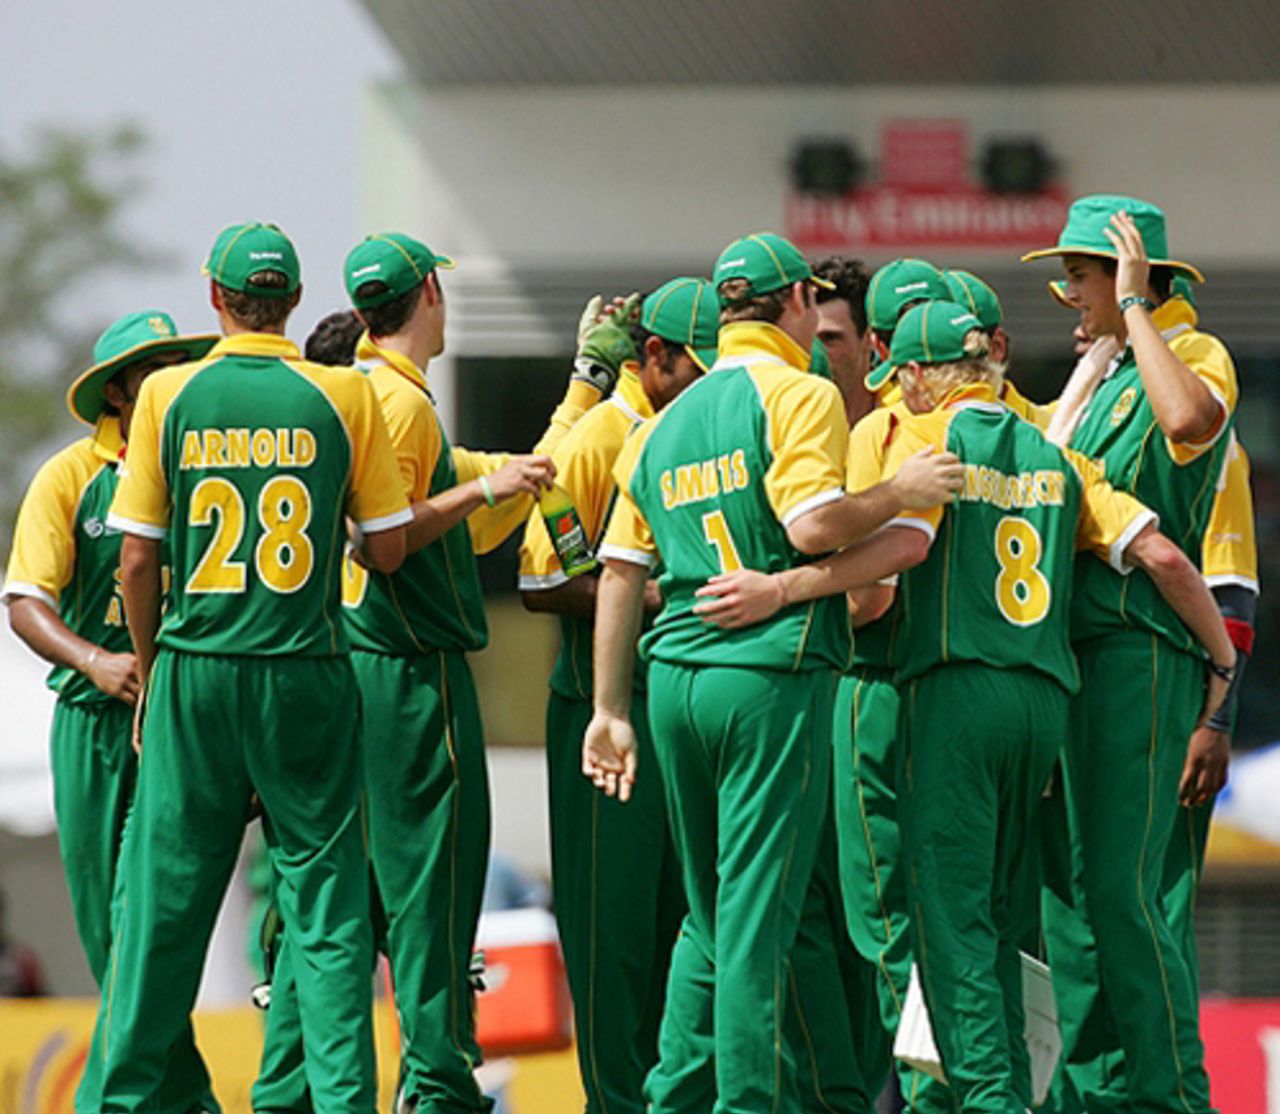 The South African players gather after the fall of a wicket  India v South Africa, Under-19 World Cup final, Kuala Lumpur, March 2, 2008 
